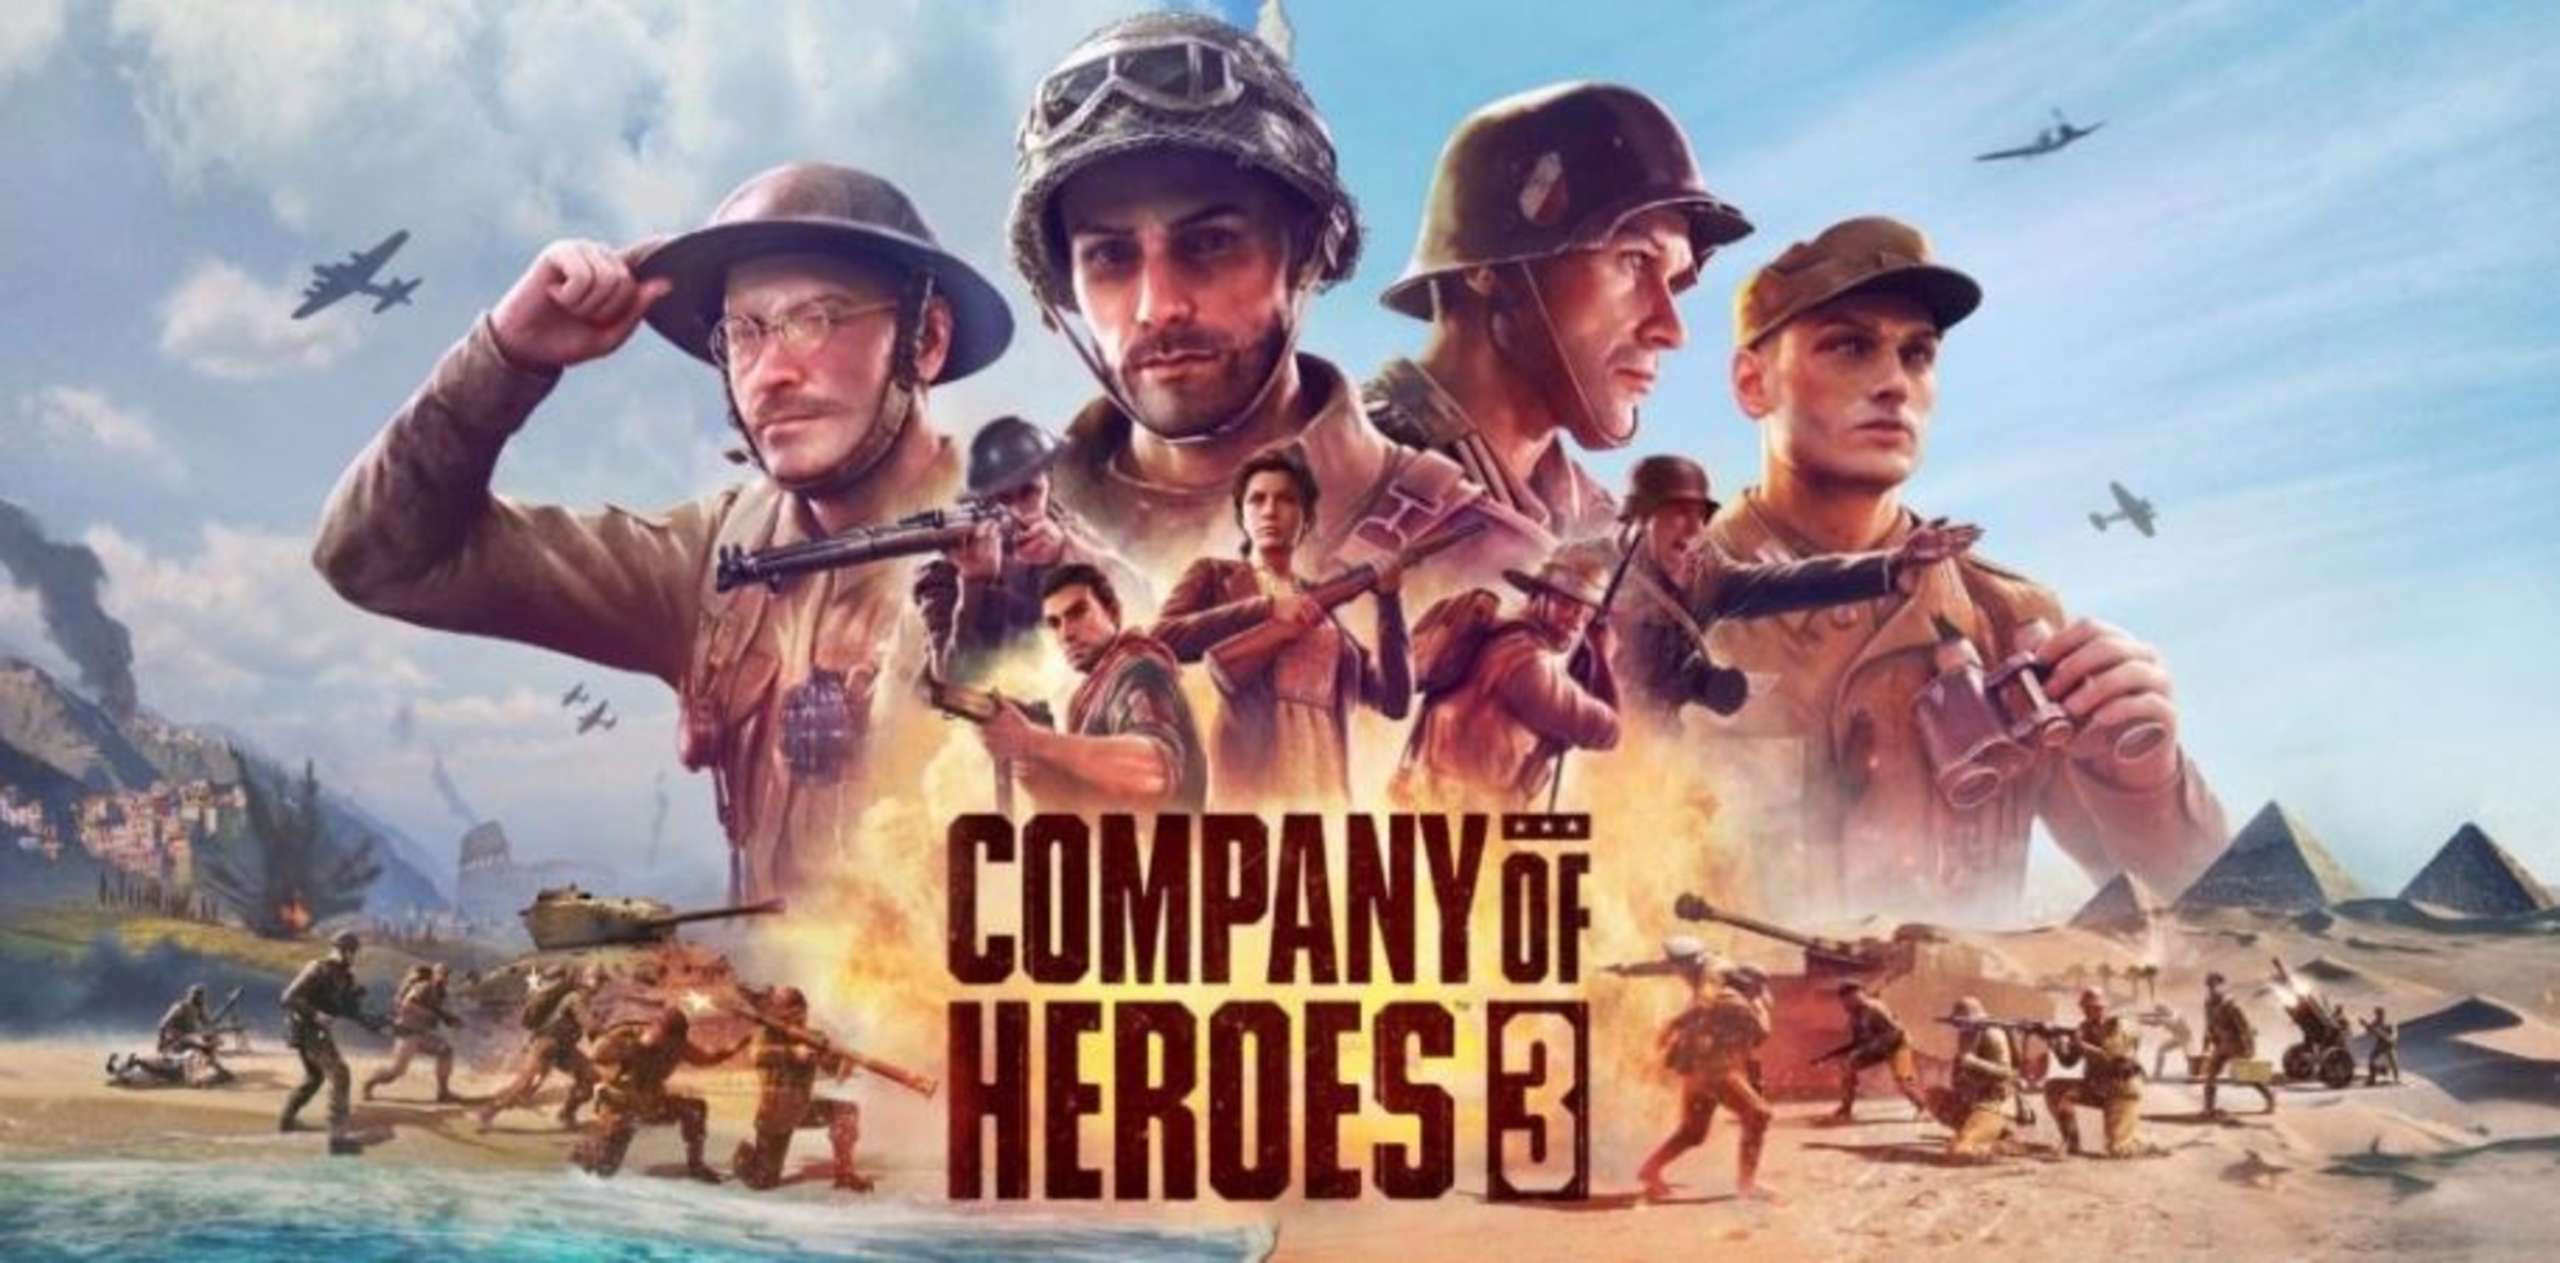 Company Of Heroes 3 Has Been Postponed From Its Initial Release Date Of November 17, 2018, To An Unspecified Date In 2023, Per The Studio’s Official Blog Post